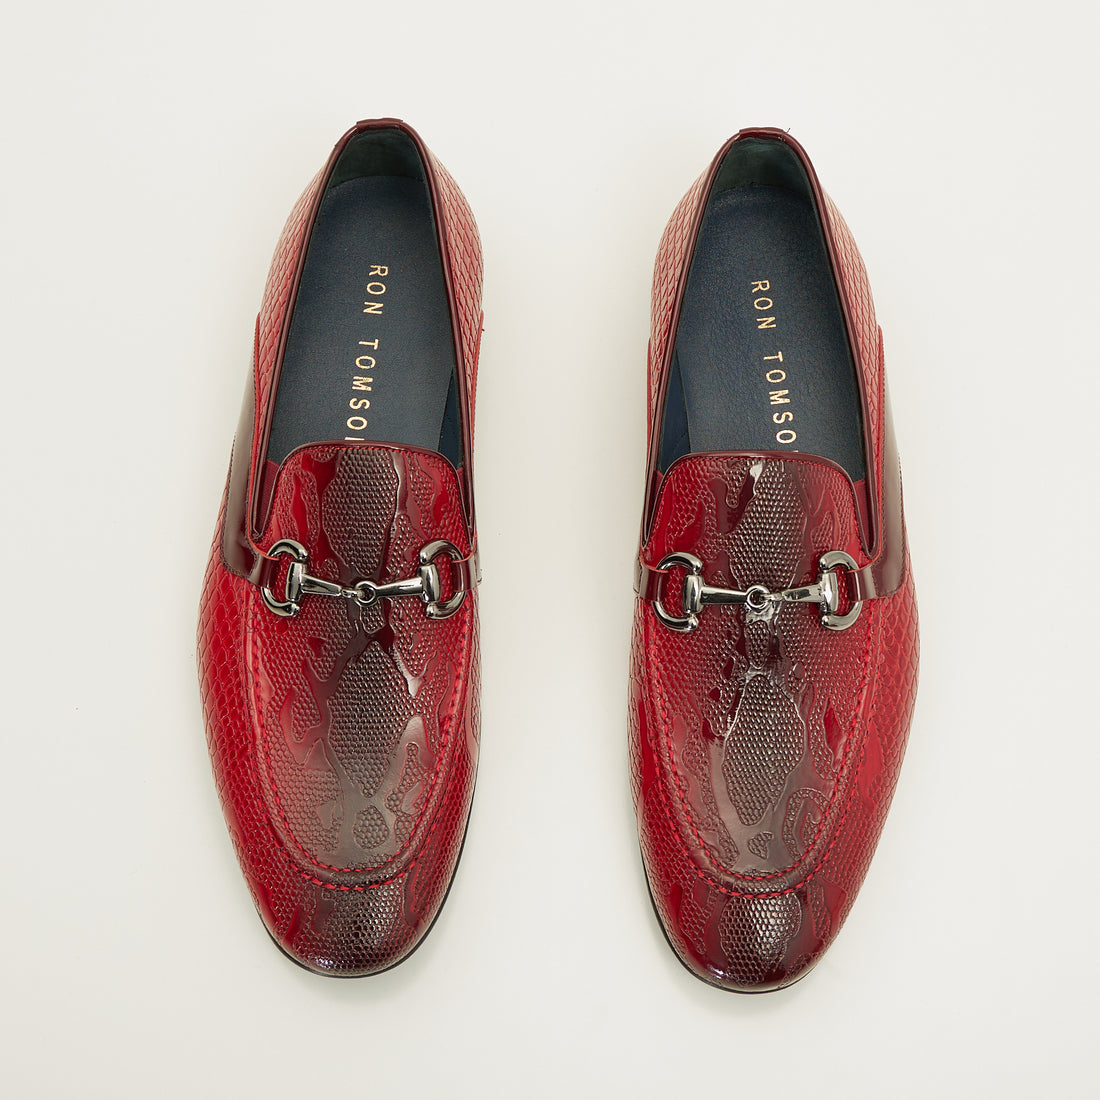 N° C9013X SNAKE EMBOSSED LEATHER AND SILVER METAL BIT LOAFER - VALENTINE RED